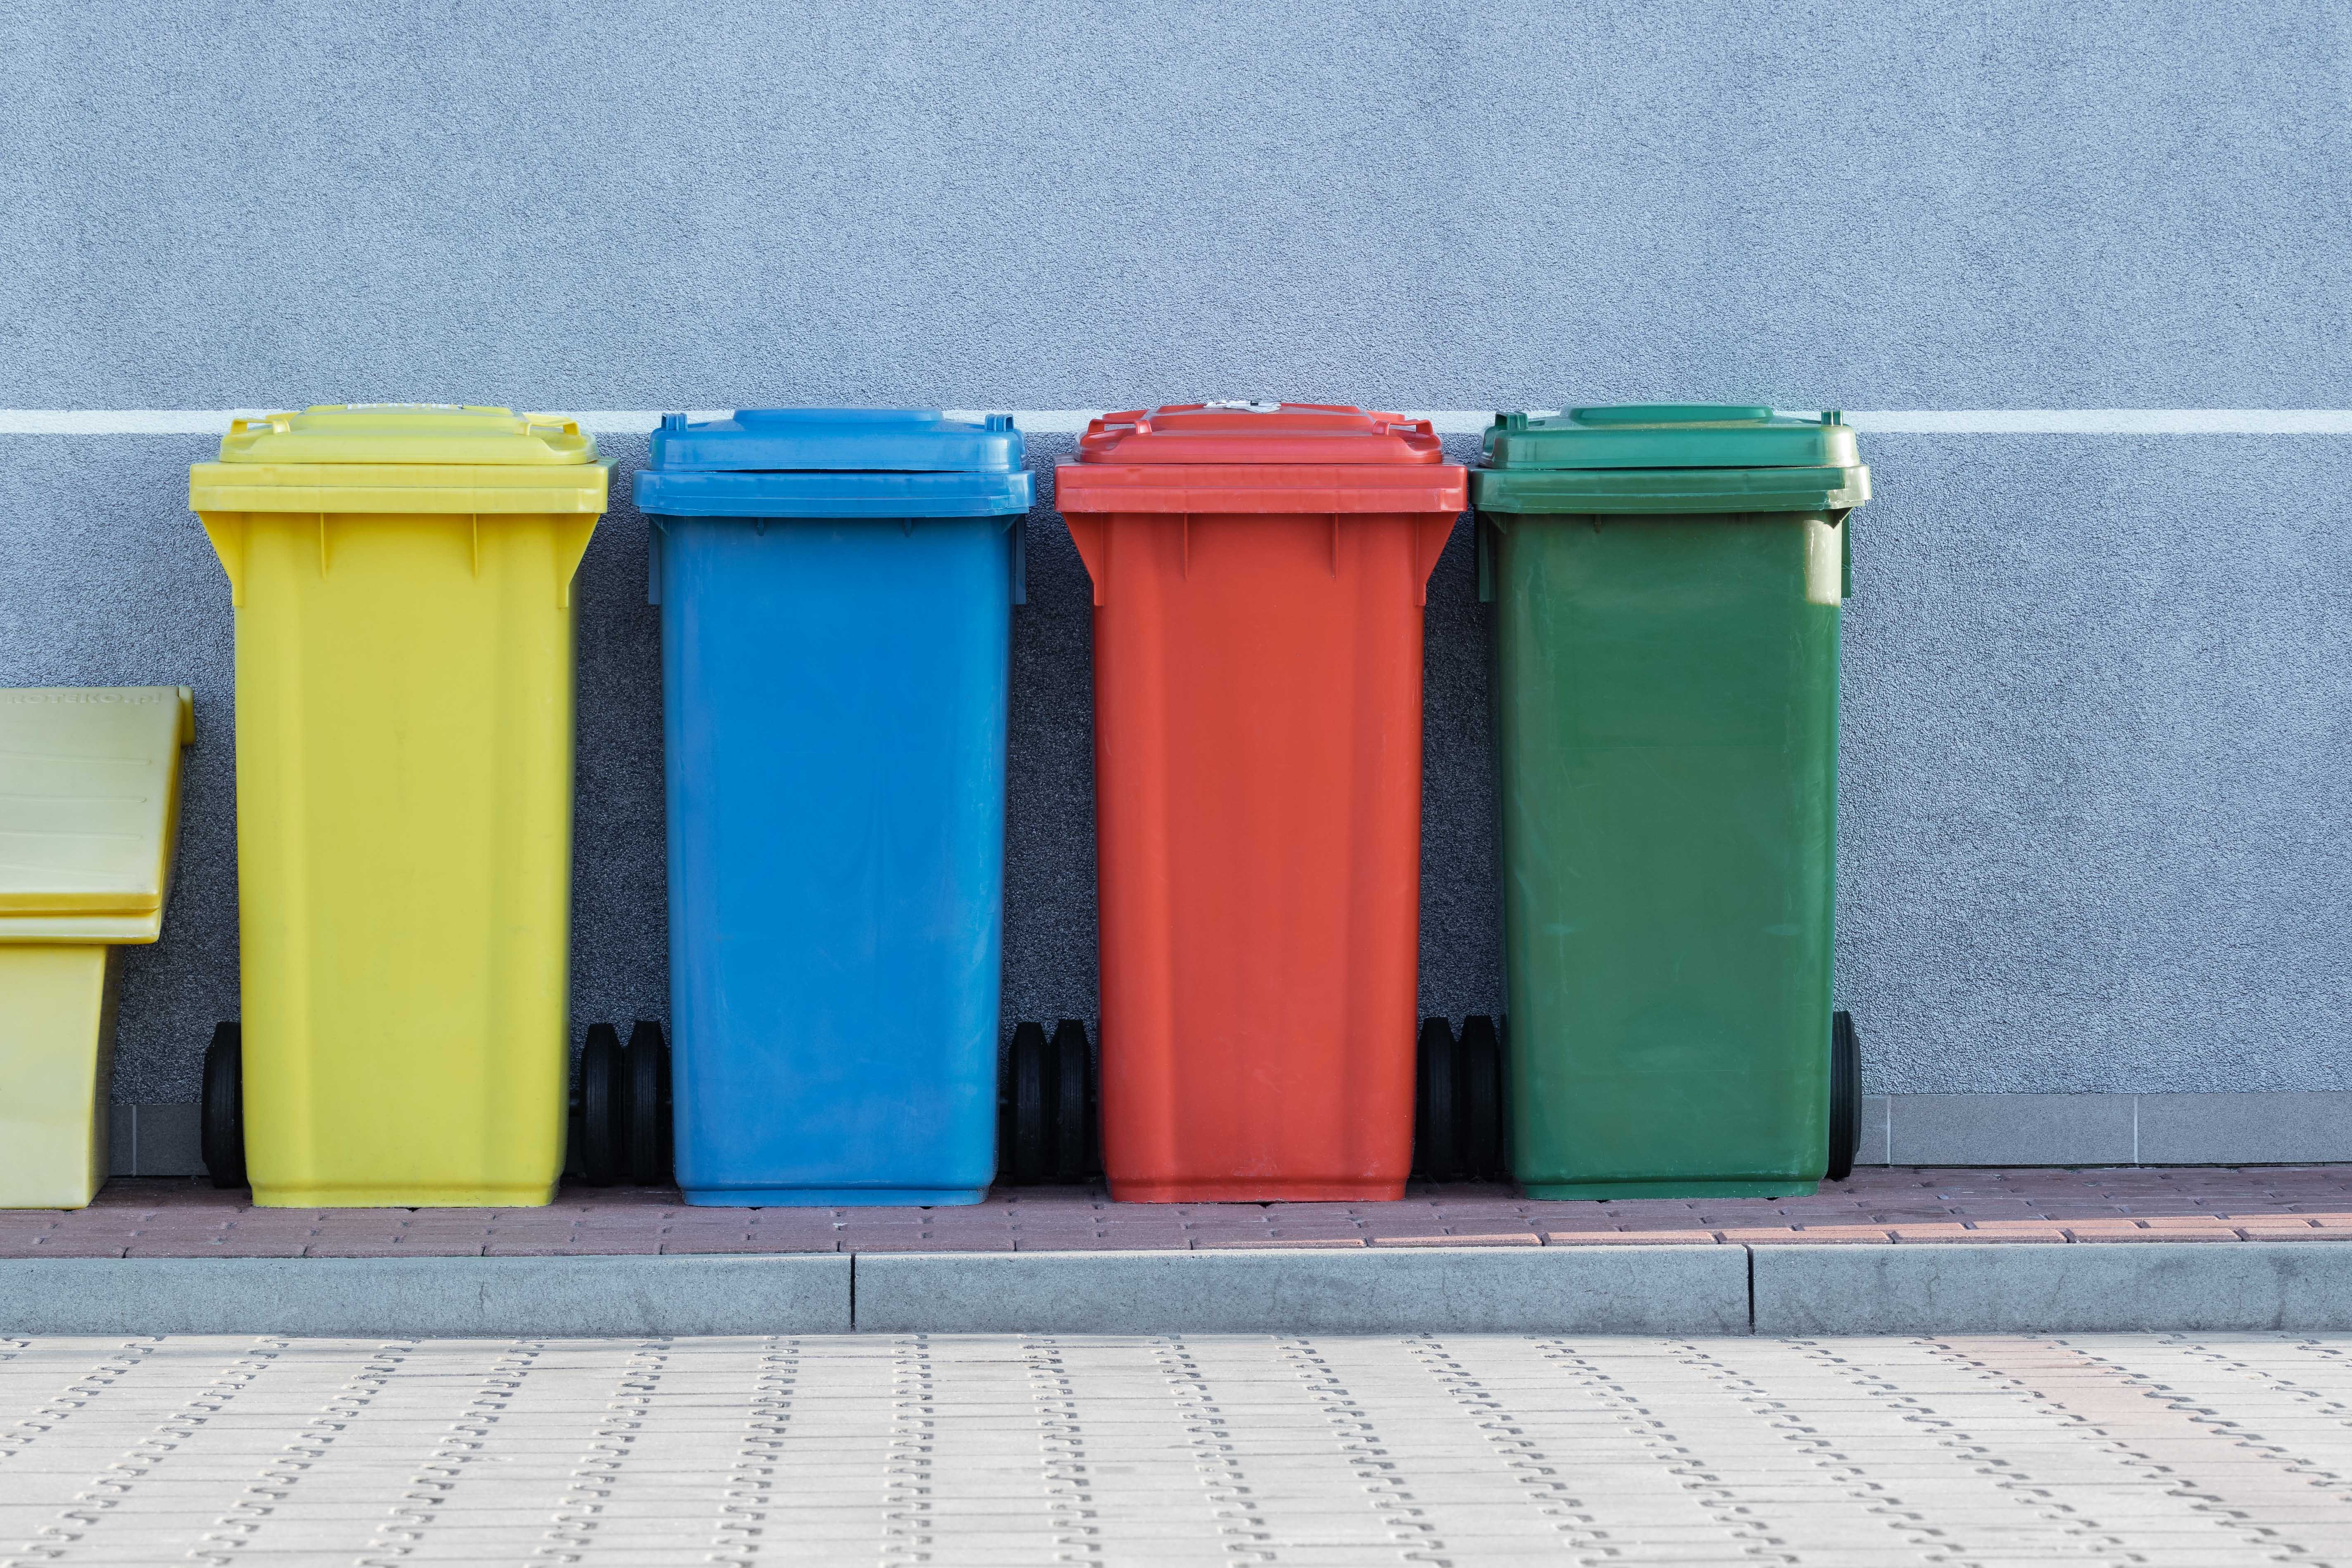 Image shows bins outside they are yellow, red, blue and green